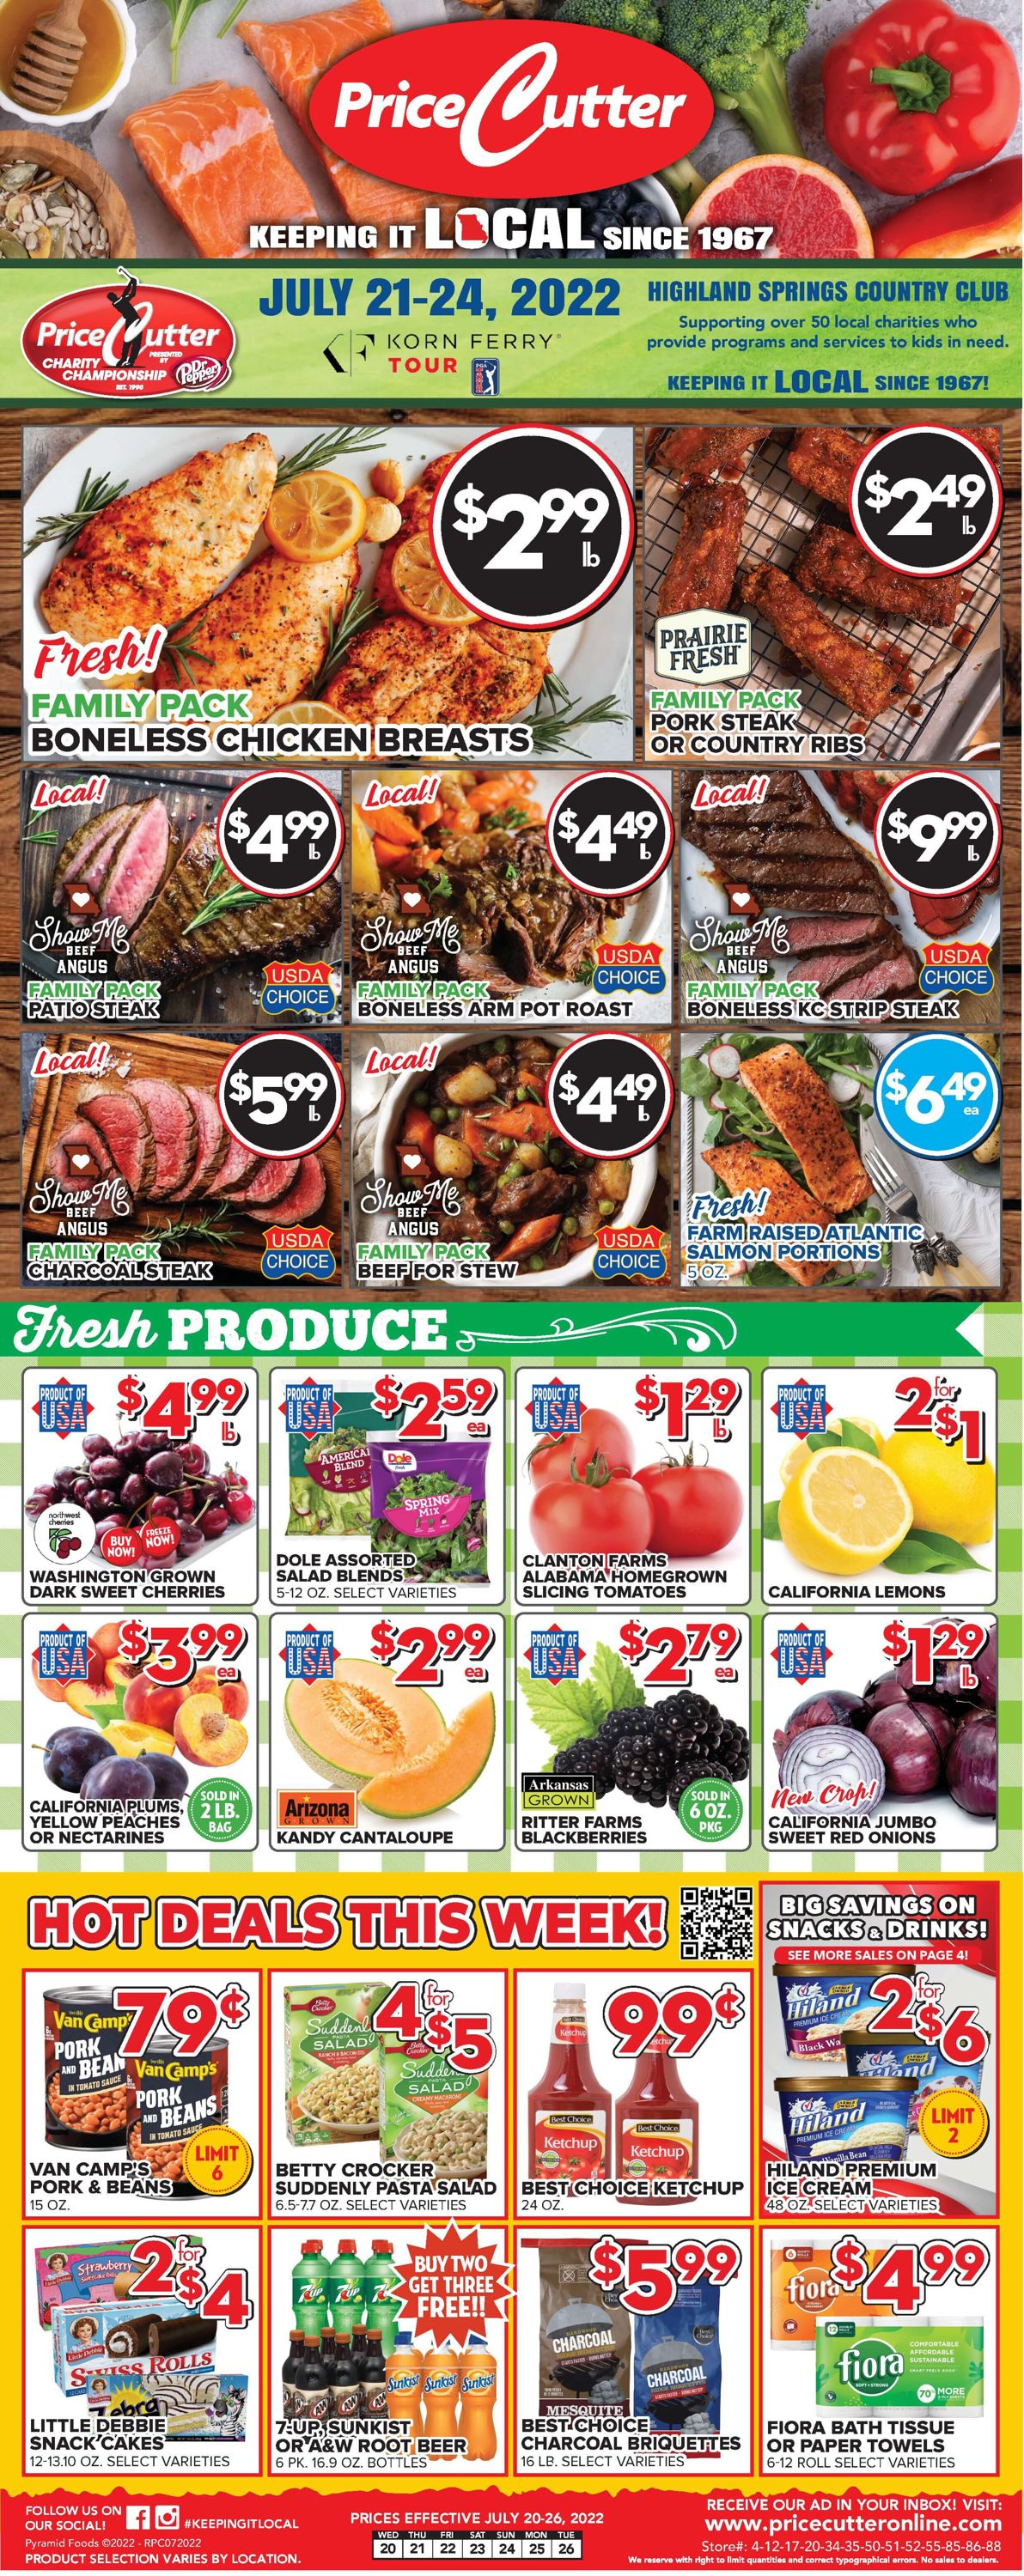 Price Cutter Weekly Ad Circular - valid 07/20-07/26/2022